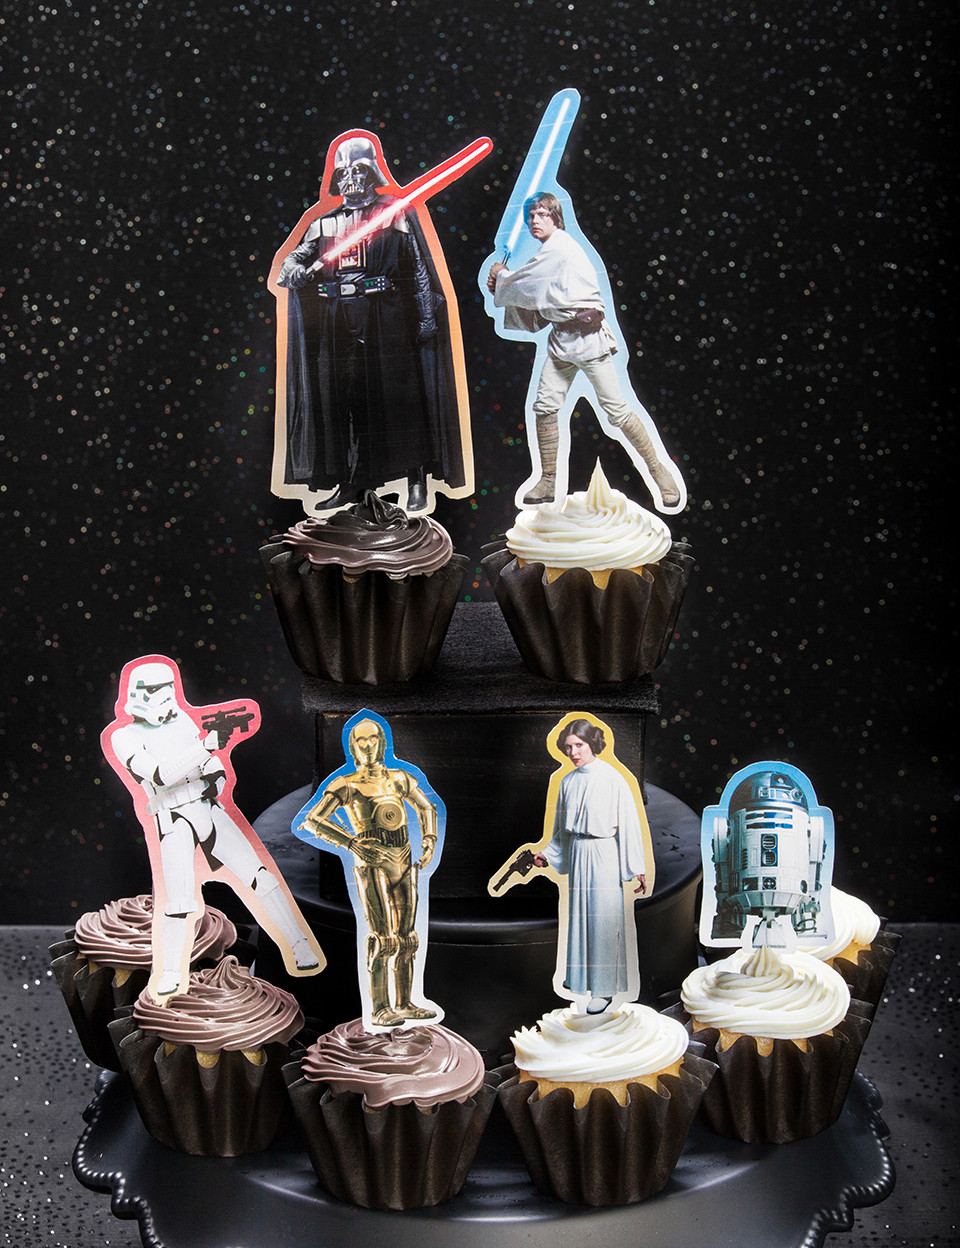 Star Wars Birthday Cake Toppers
 Star Wars Cupcake Toppers